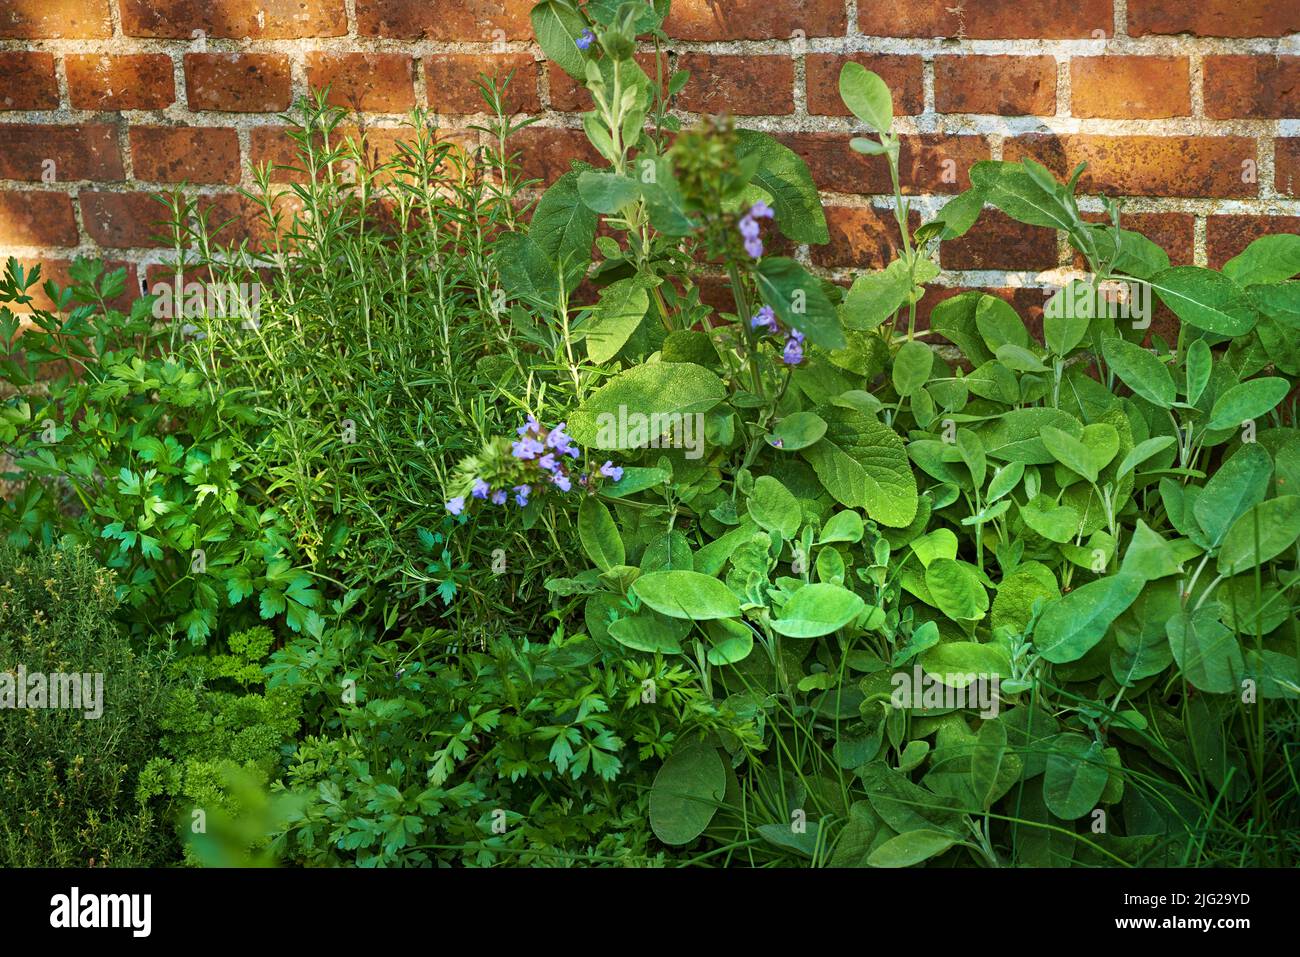 View of fresh parsley, thyme, coriander and basil growing in a vegetable garden at home. Texture detail of vibrant and lush cooking aroma herbs Stock Photo